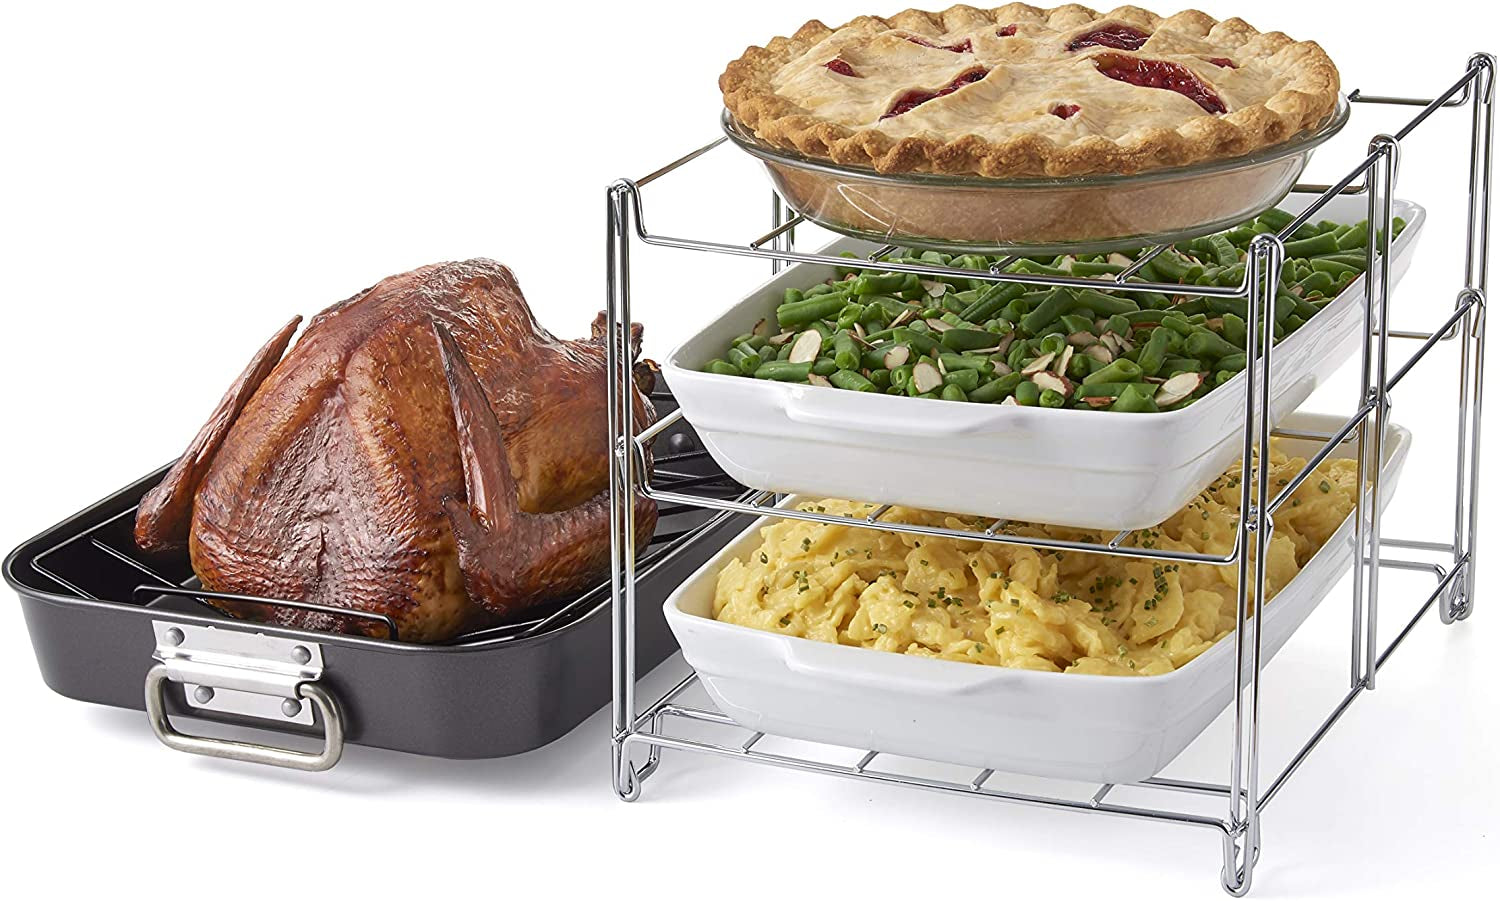 Nifty Expandable Roasting Rack – Easy-Grip Handles, Multipurpose Cooking Accessory, Chrome-Plated Steel, Dishwasher Safe, Heavy-Duty Design for Turkey, Ham, Goose, or Roast